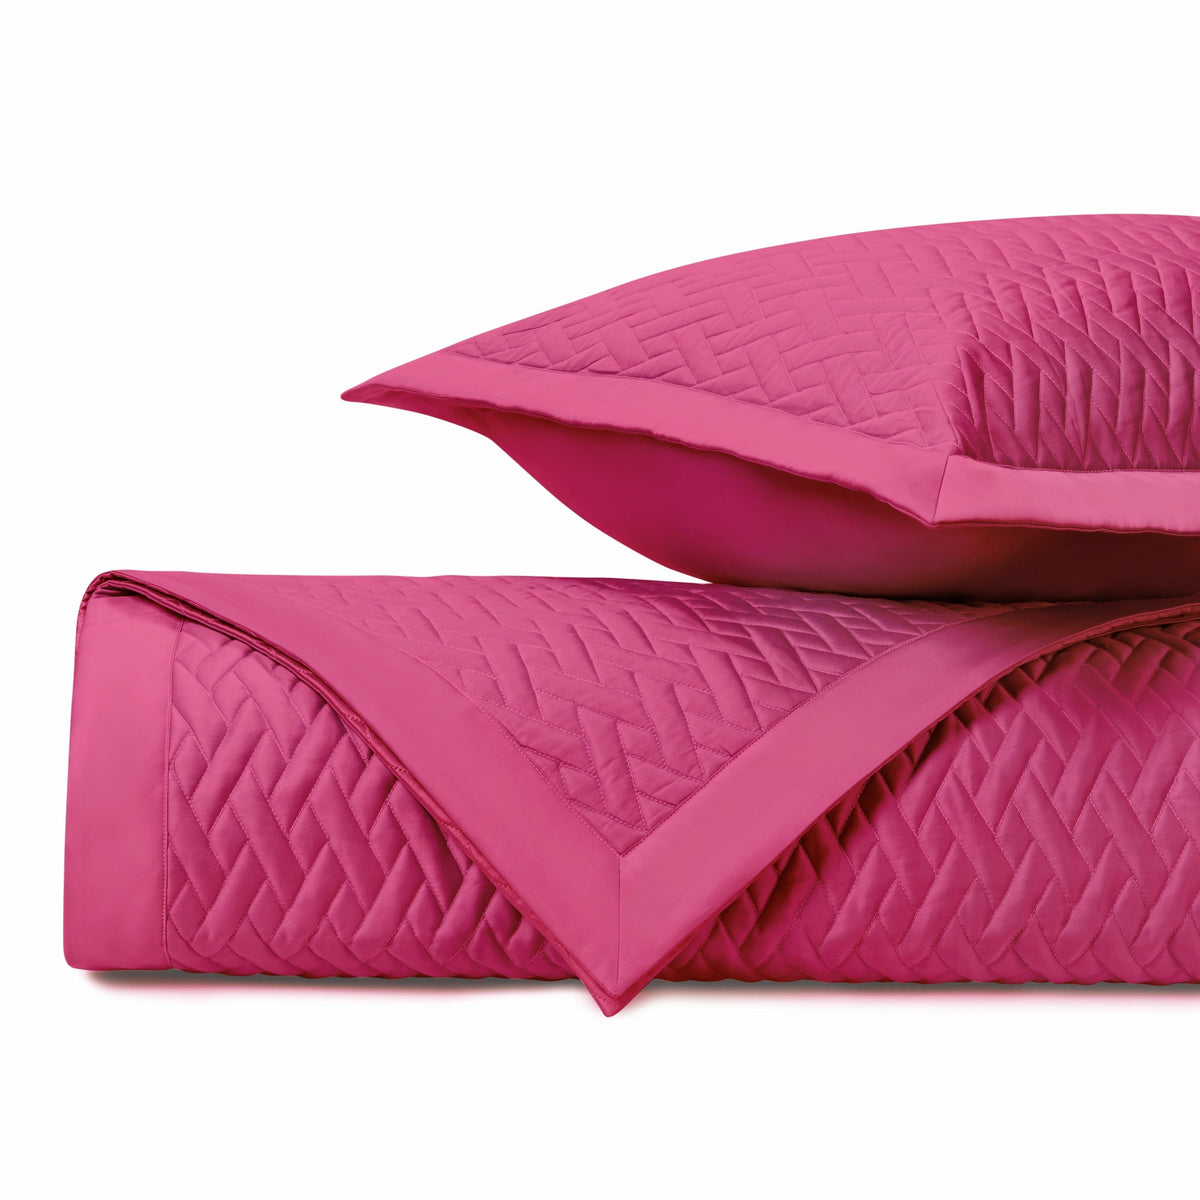 Home Treasures Viscaya Quilted Bedding Bright Pink Fine Linens